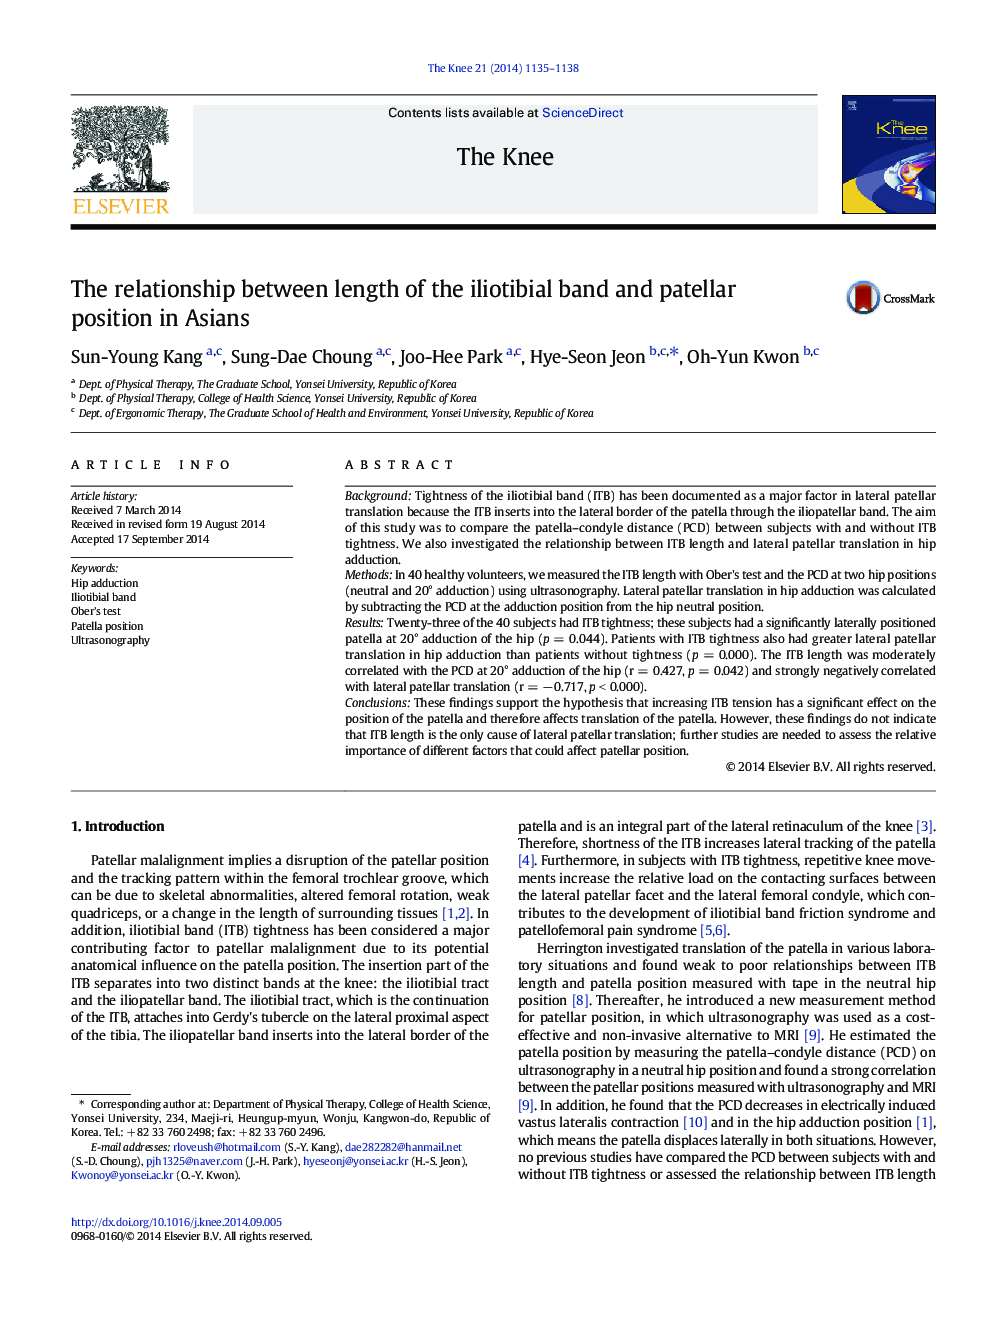 The relationship between length of the iliotibial band and patellar position in Asians